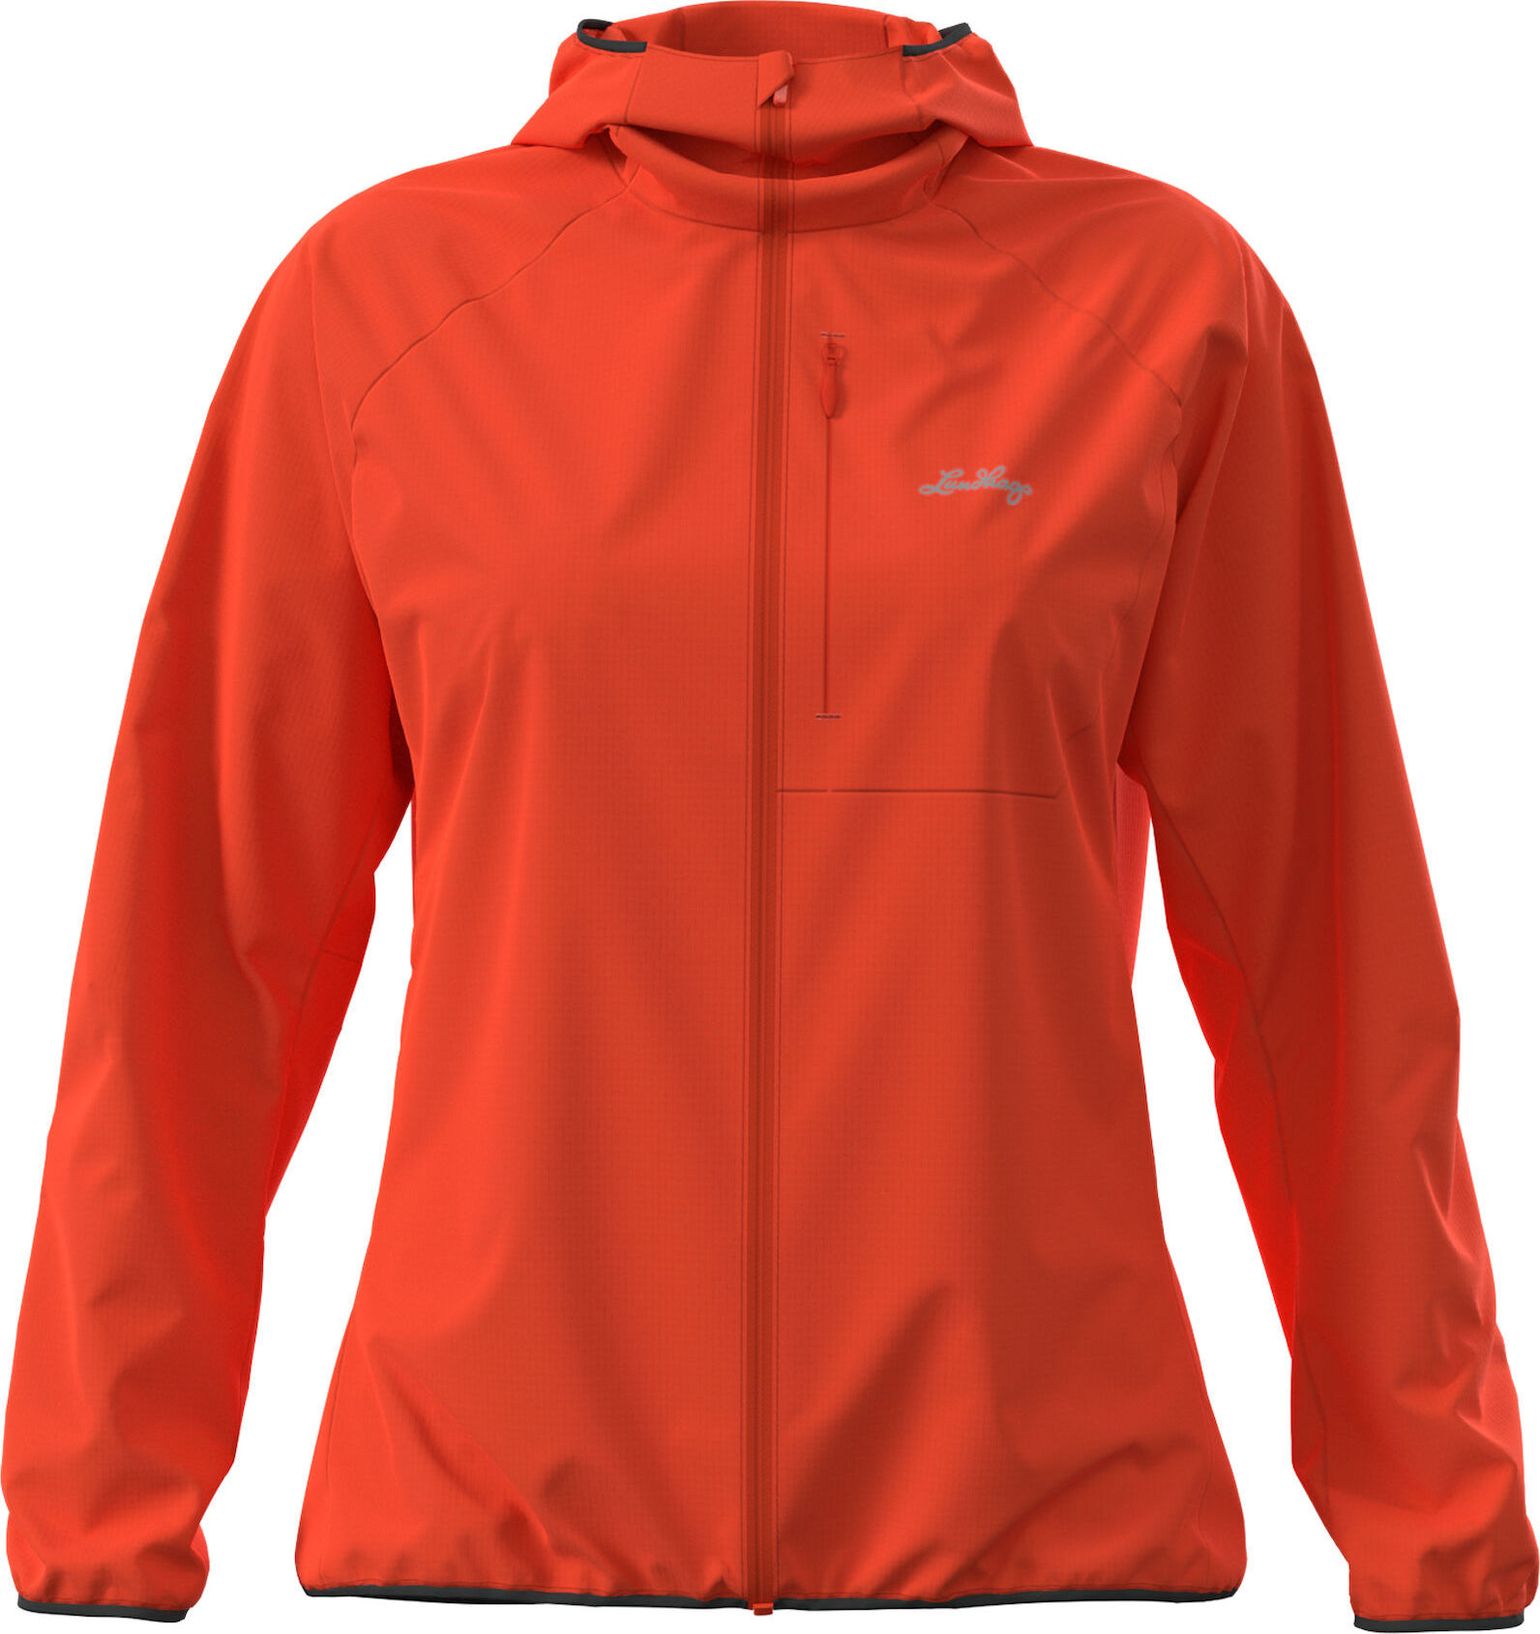 Lundhags Women's Tived Light Wind Jacket Lively Red